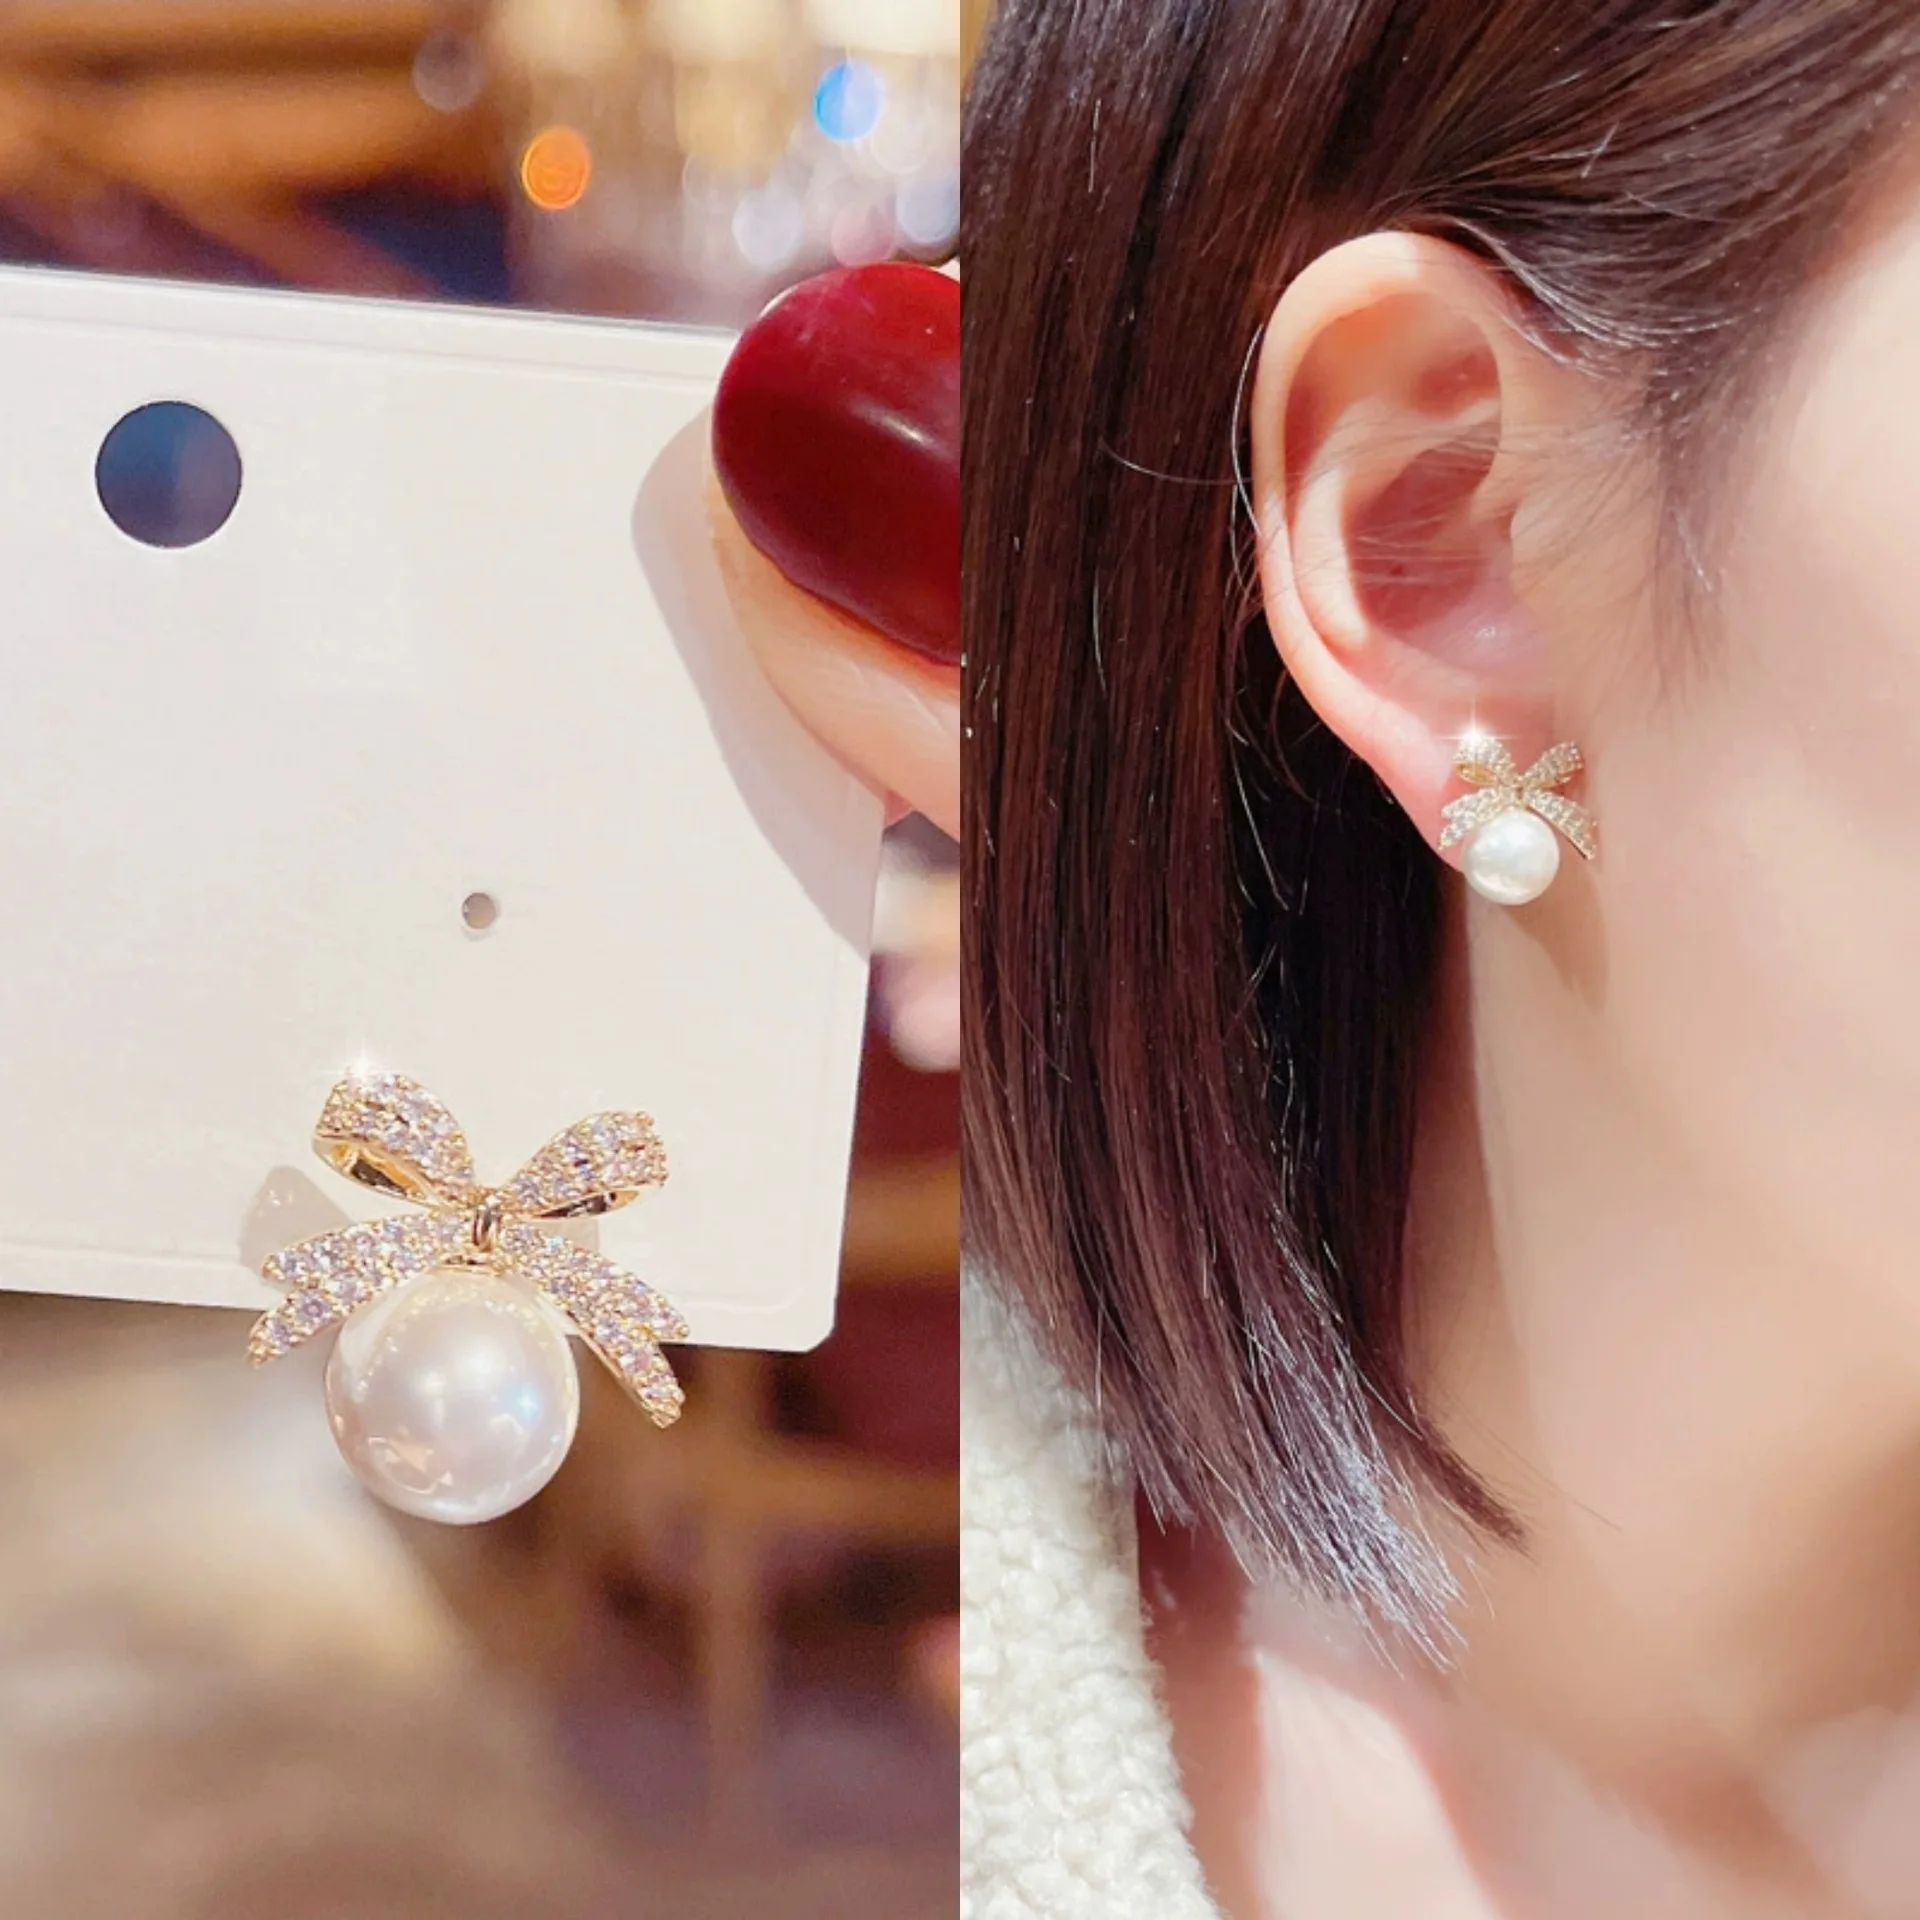 Light Luxury Girls Exquisite Cultured Pearl Earrings Crystal Bow Earrings Micro Stud Earring Cultured